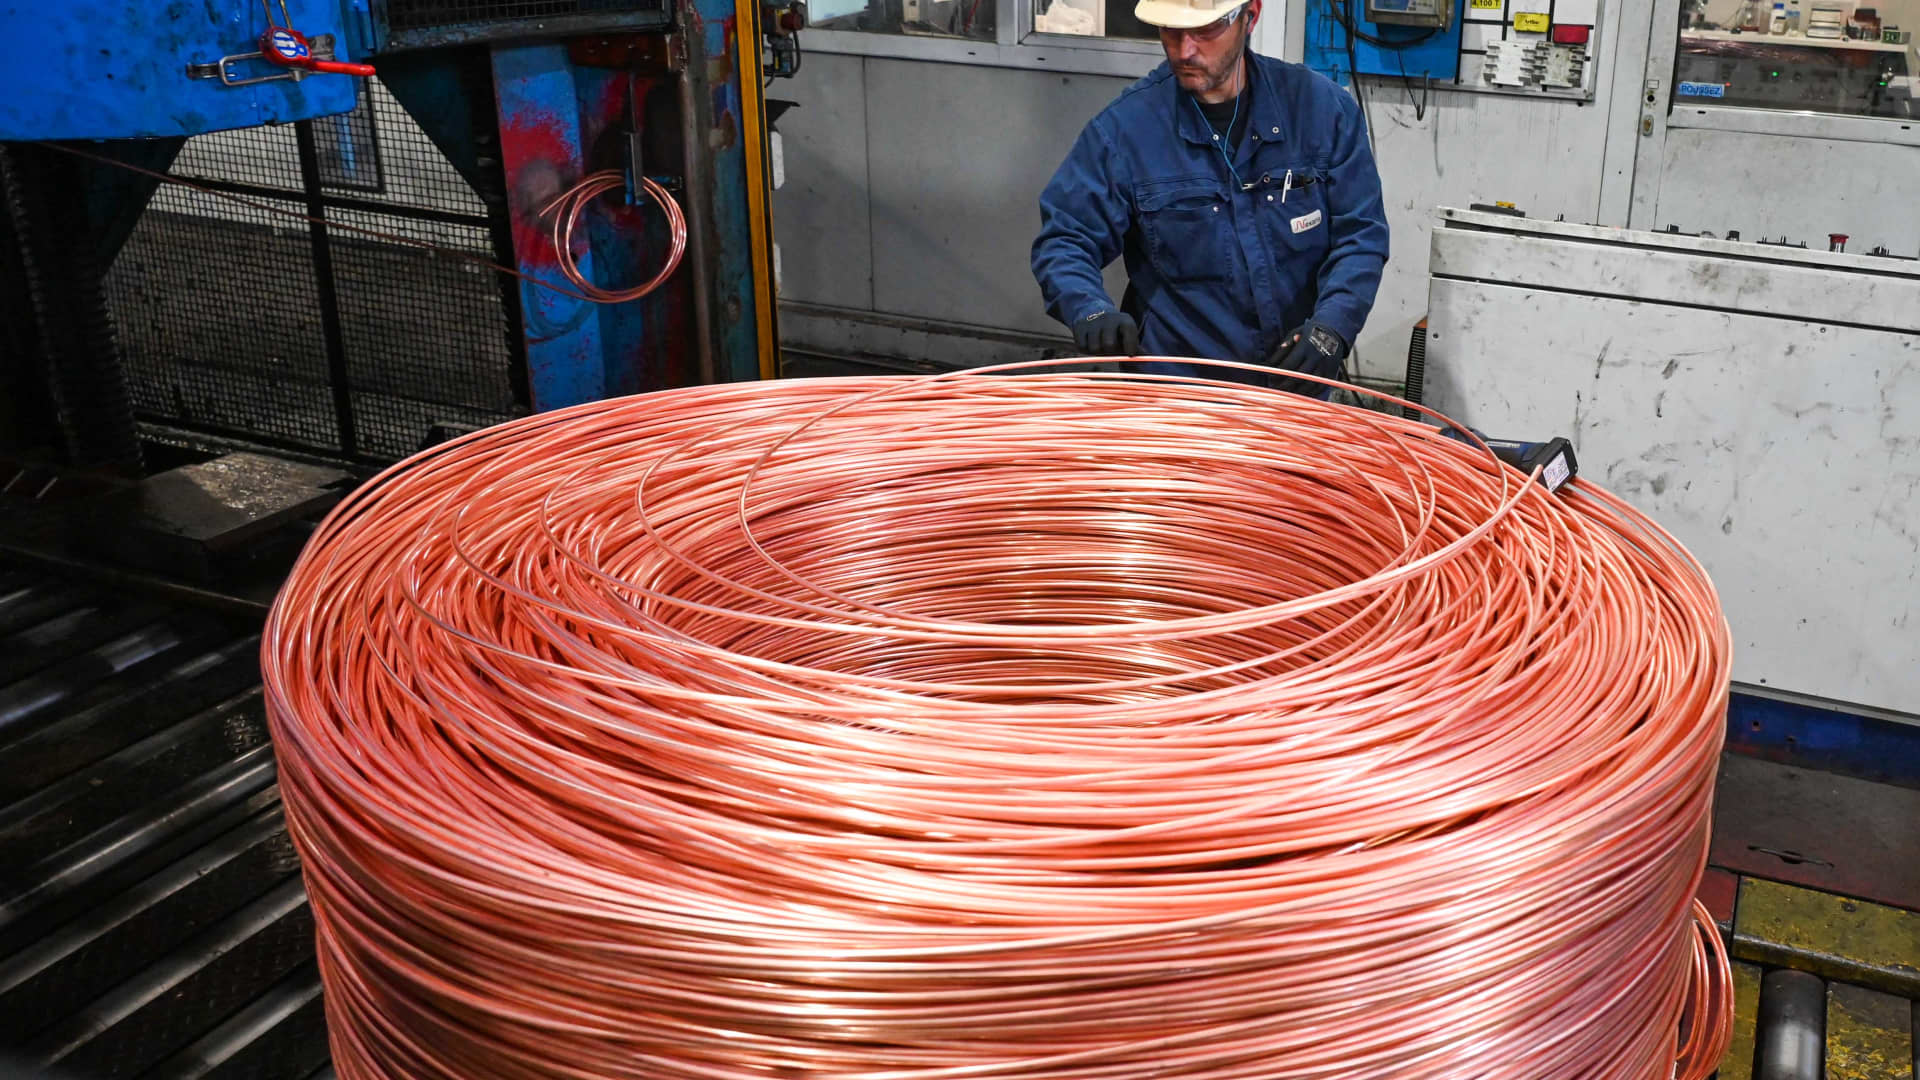 ‘Big change’ in global growth is bullish for commodities including copper, says VanEck CEO